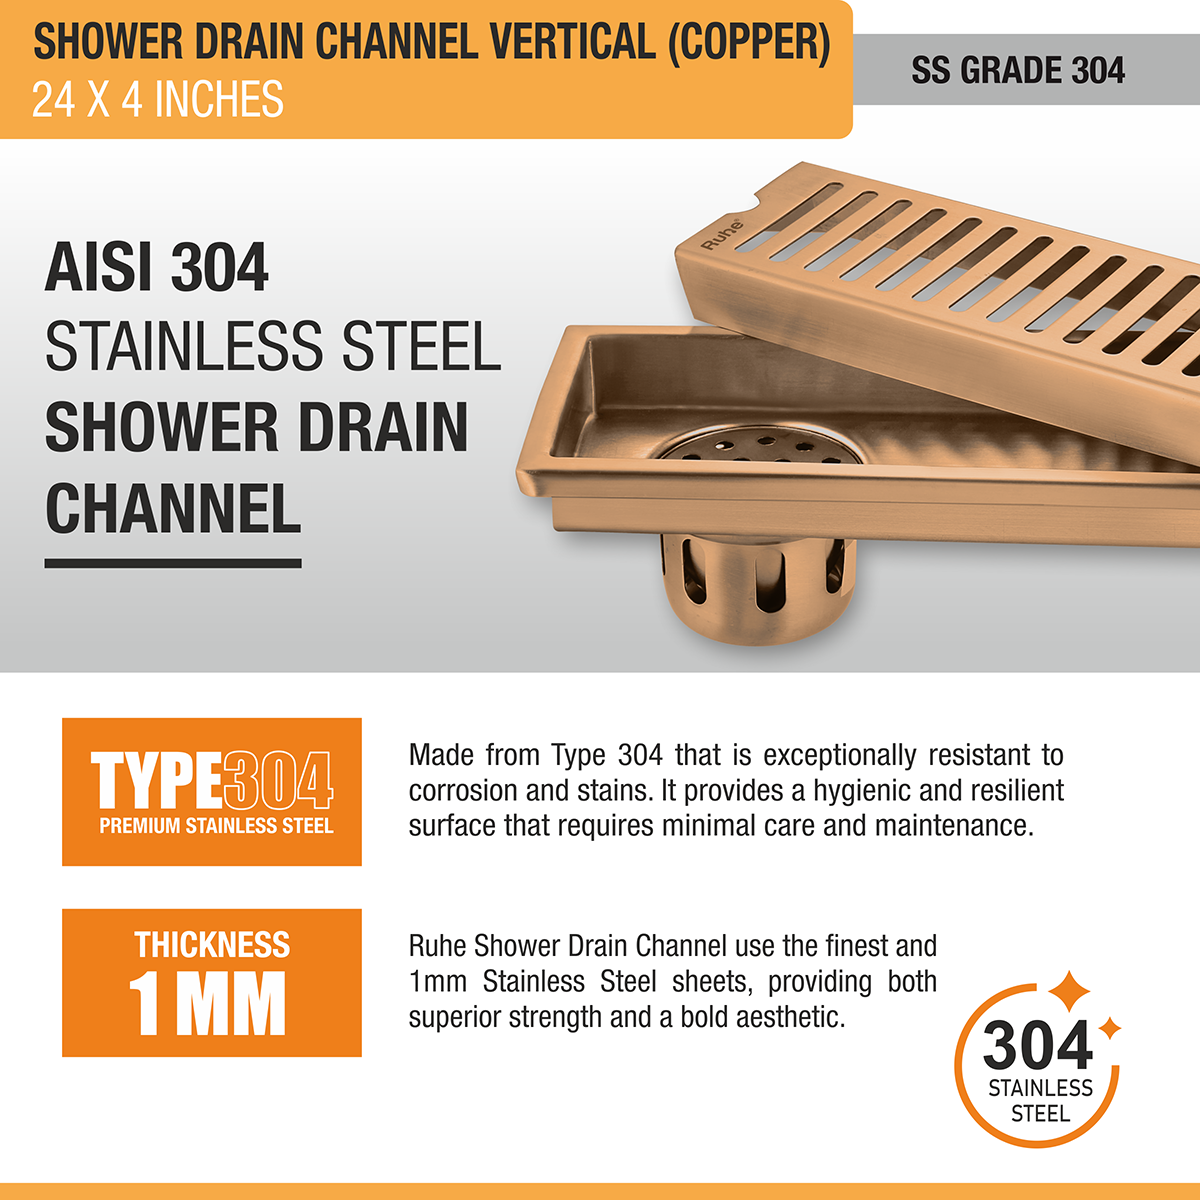 Vertical Shower Drain Channel (24 x 4 Inches) ROSE GOLD/ANTIQUE COPPER stainless steel